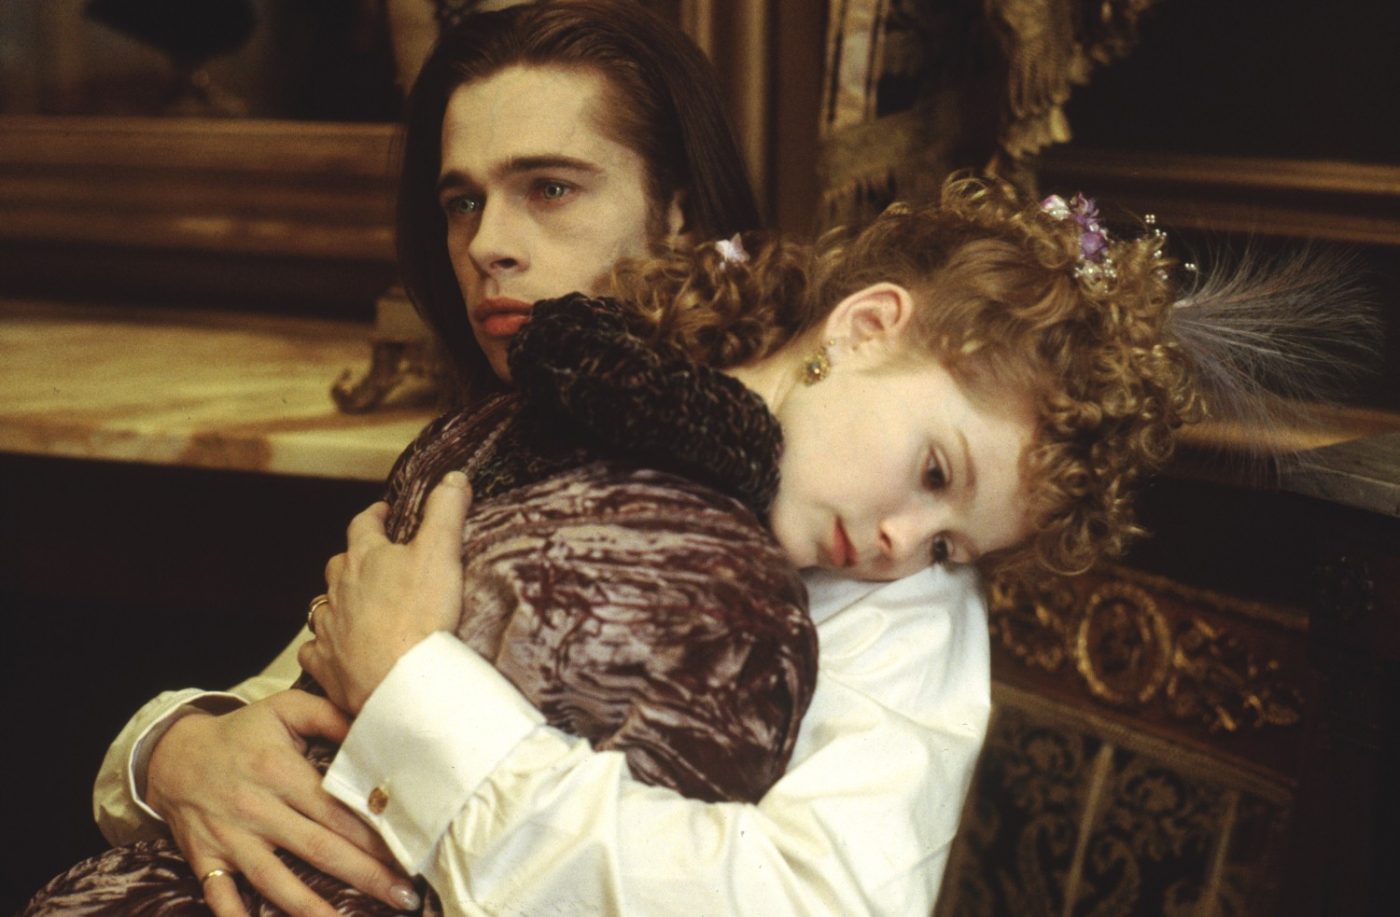 Interview with the Vampire: The Vampire Chronicles (1994) Review